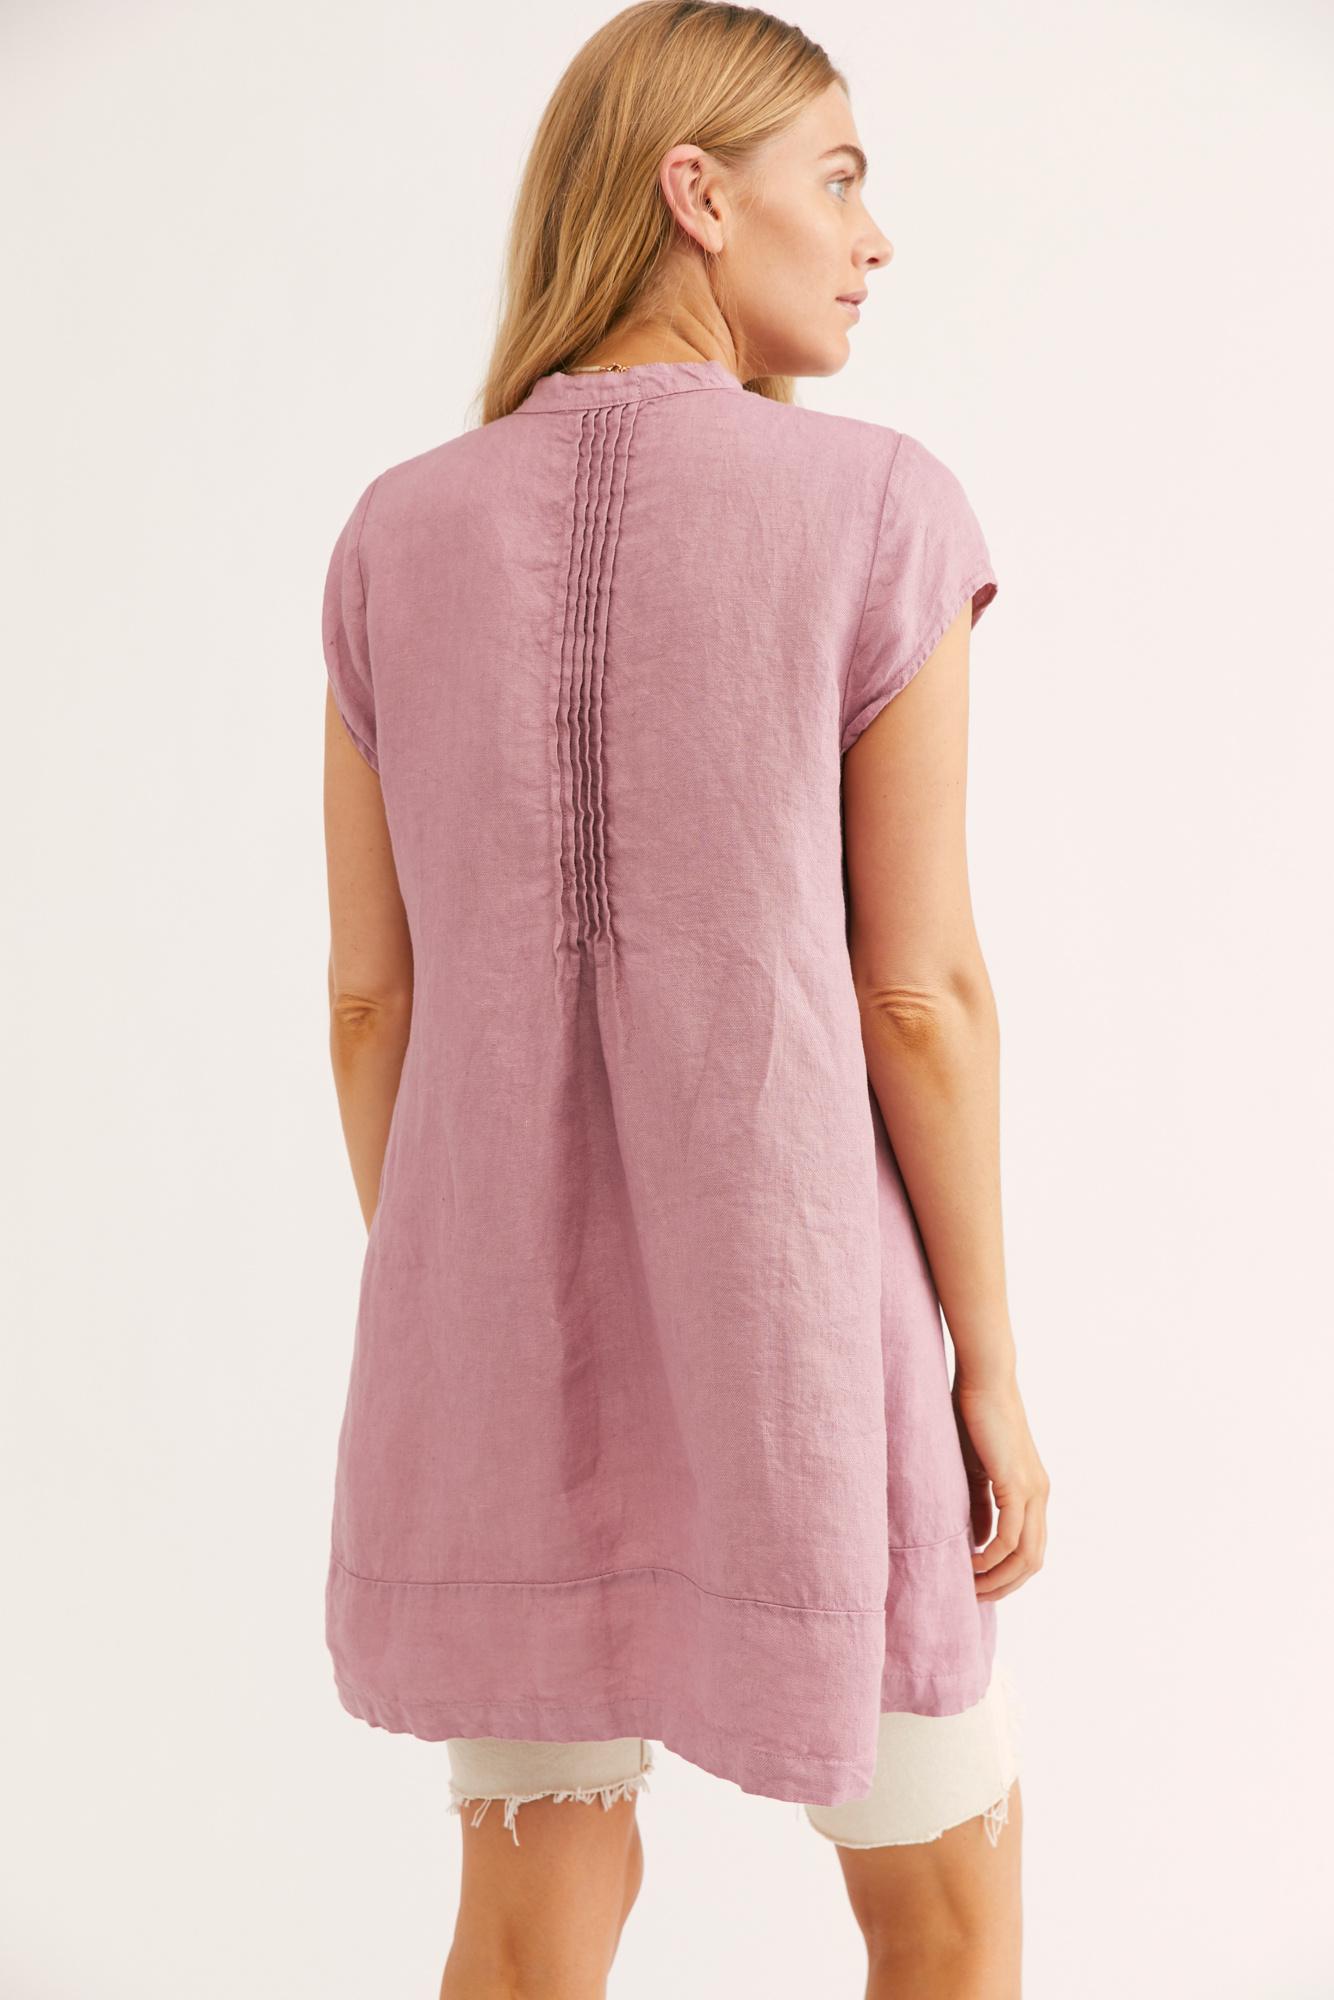 Free People River Linen Tunic By Cp Shades in Pink - Lyst